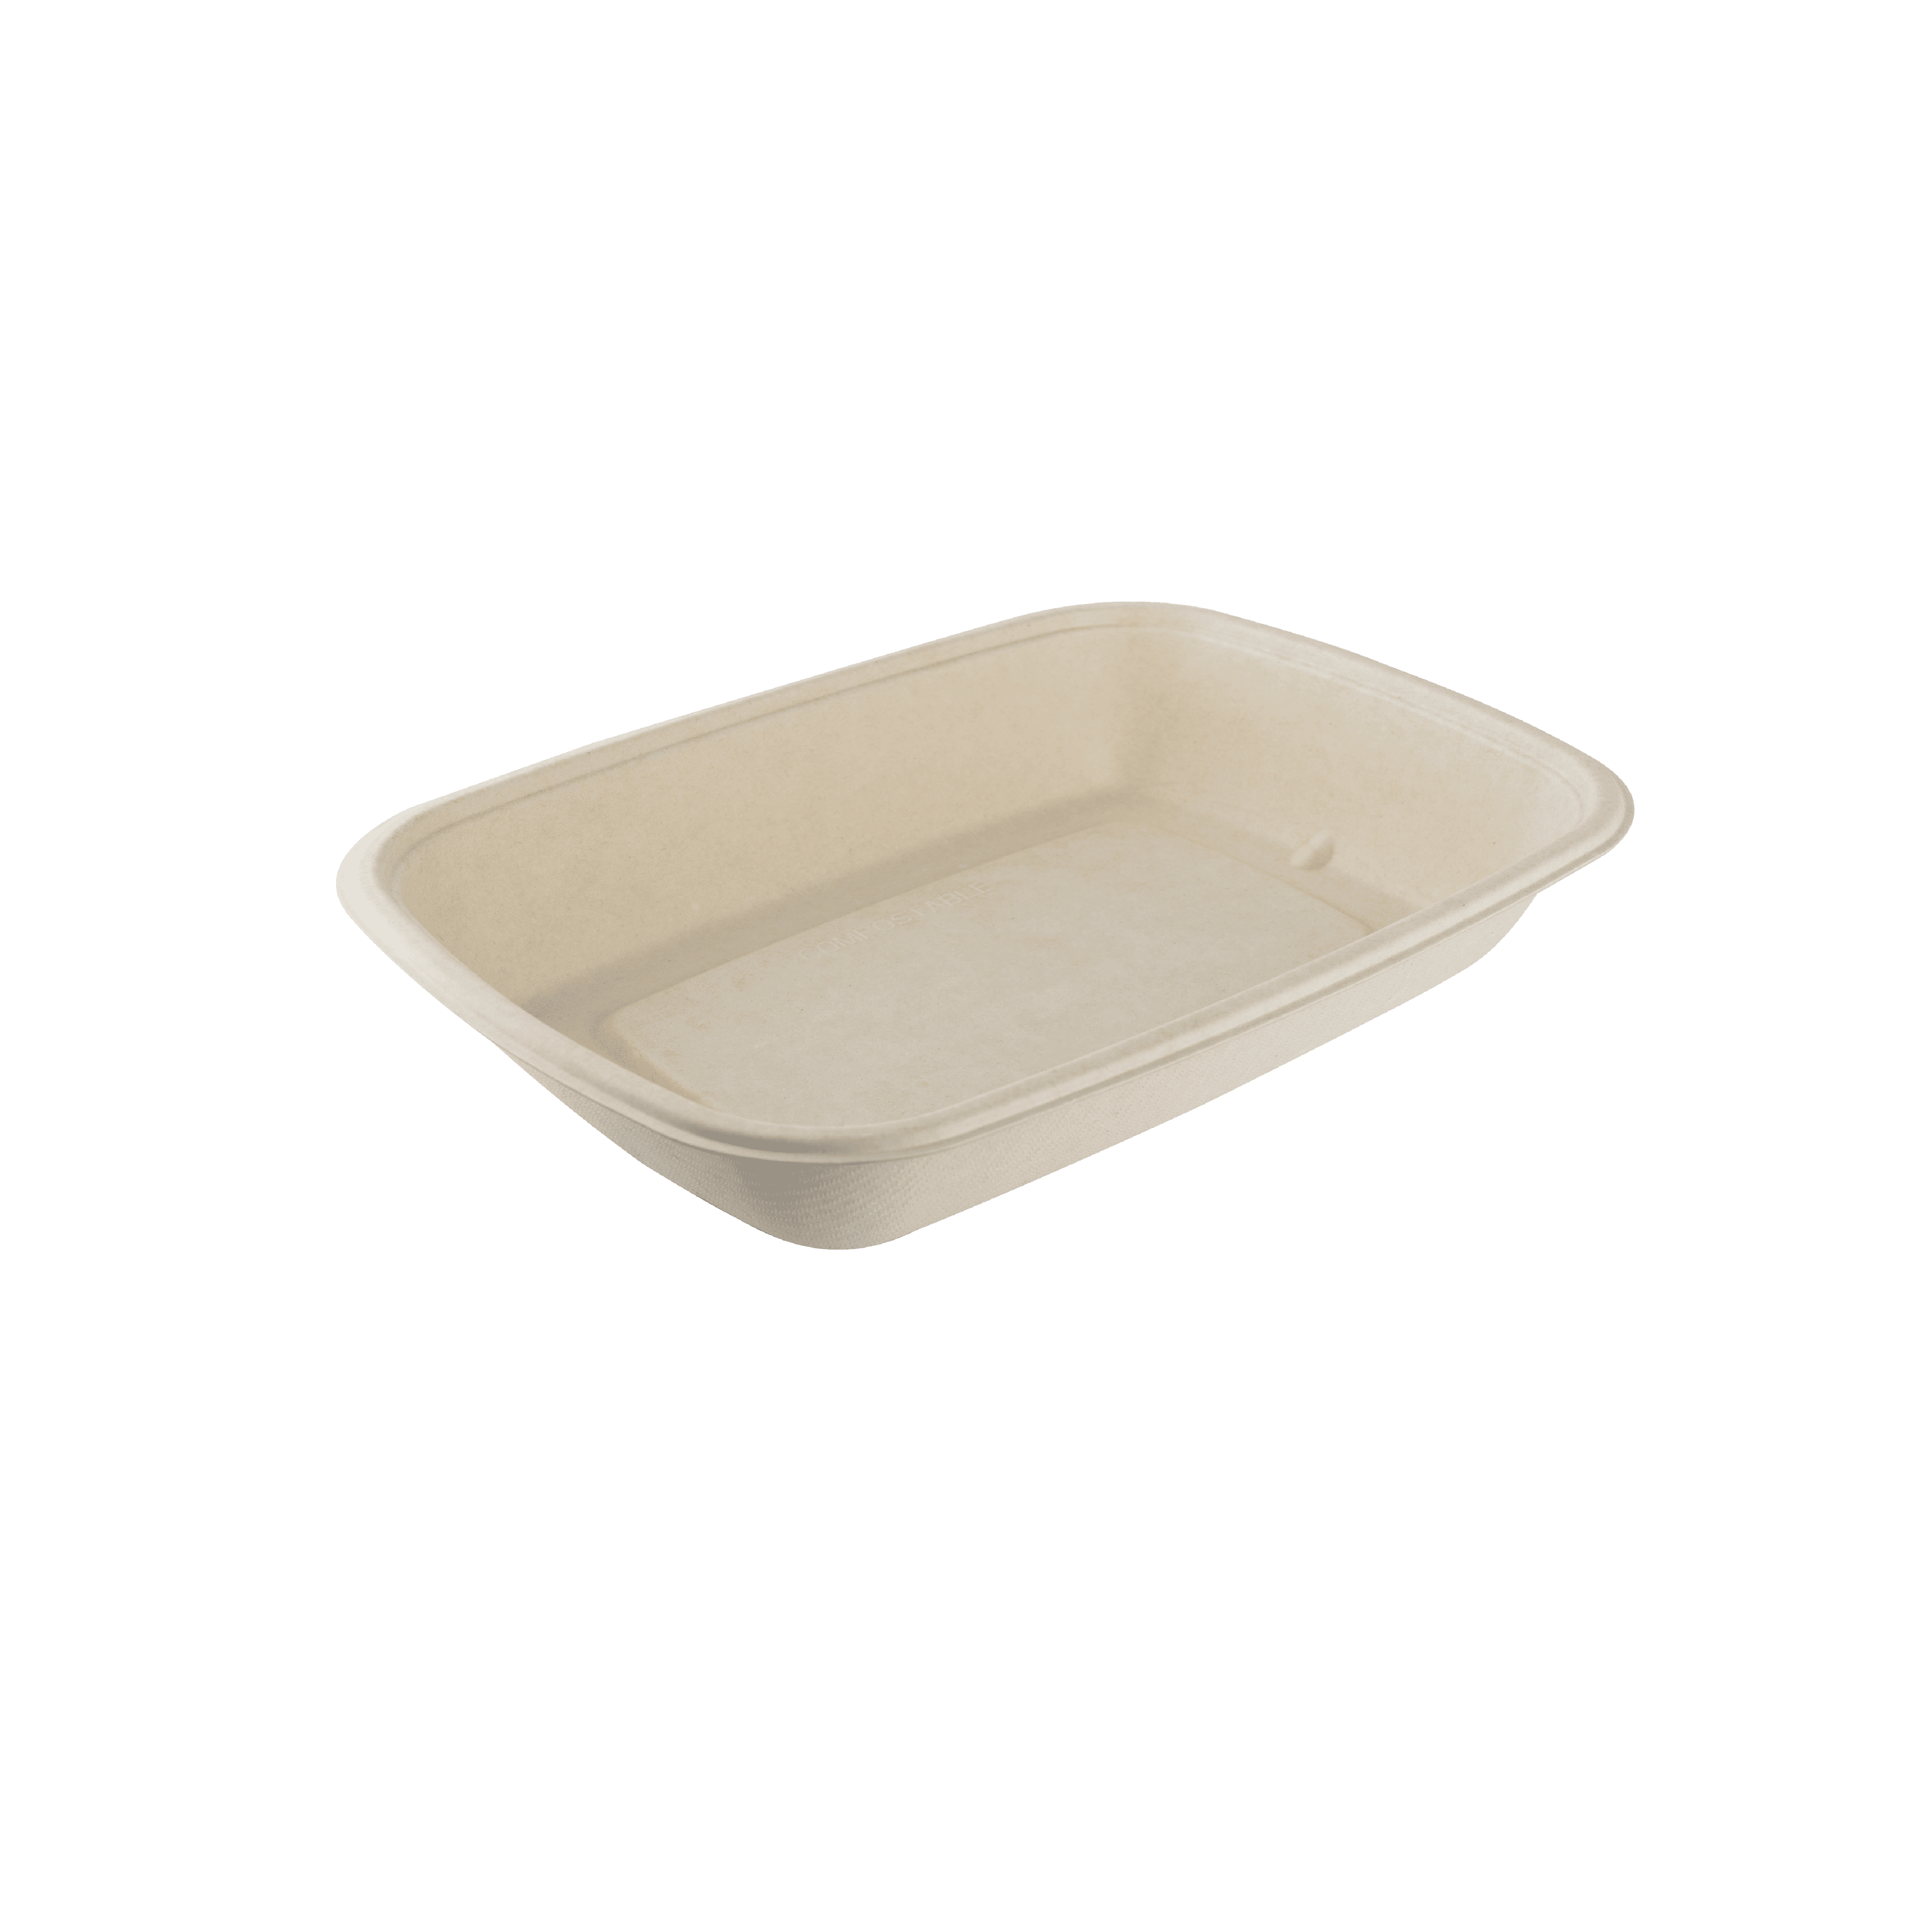 24oz -1 Compartment Planet Choice Fiber Rectangular Container - Coated